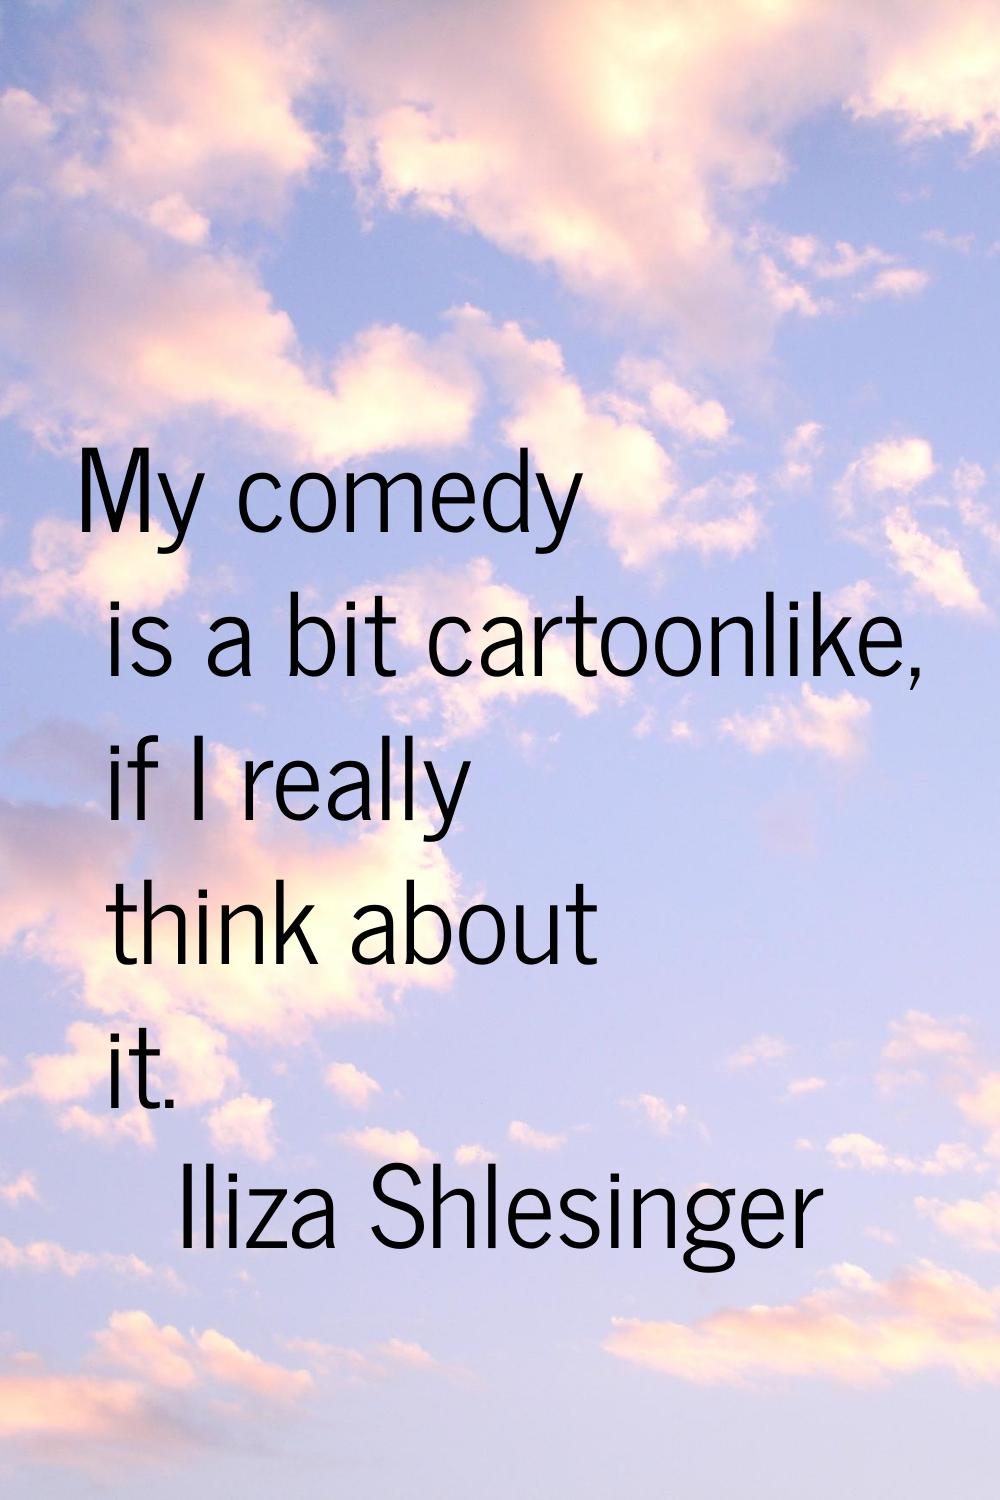 My comedy is a bit cartoonlike, if I really think about it.